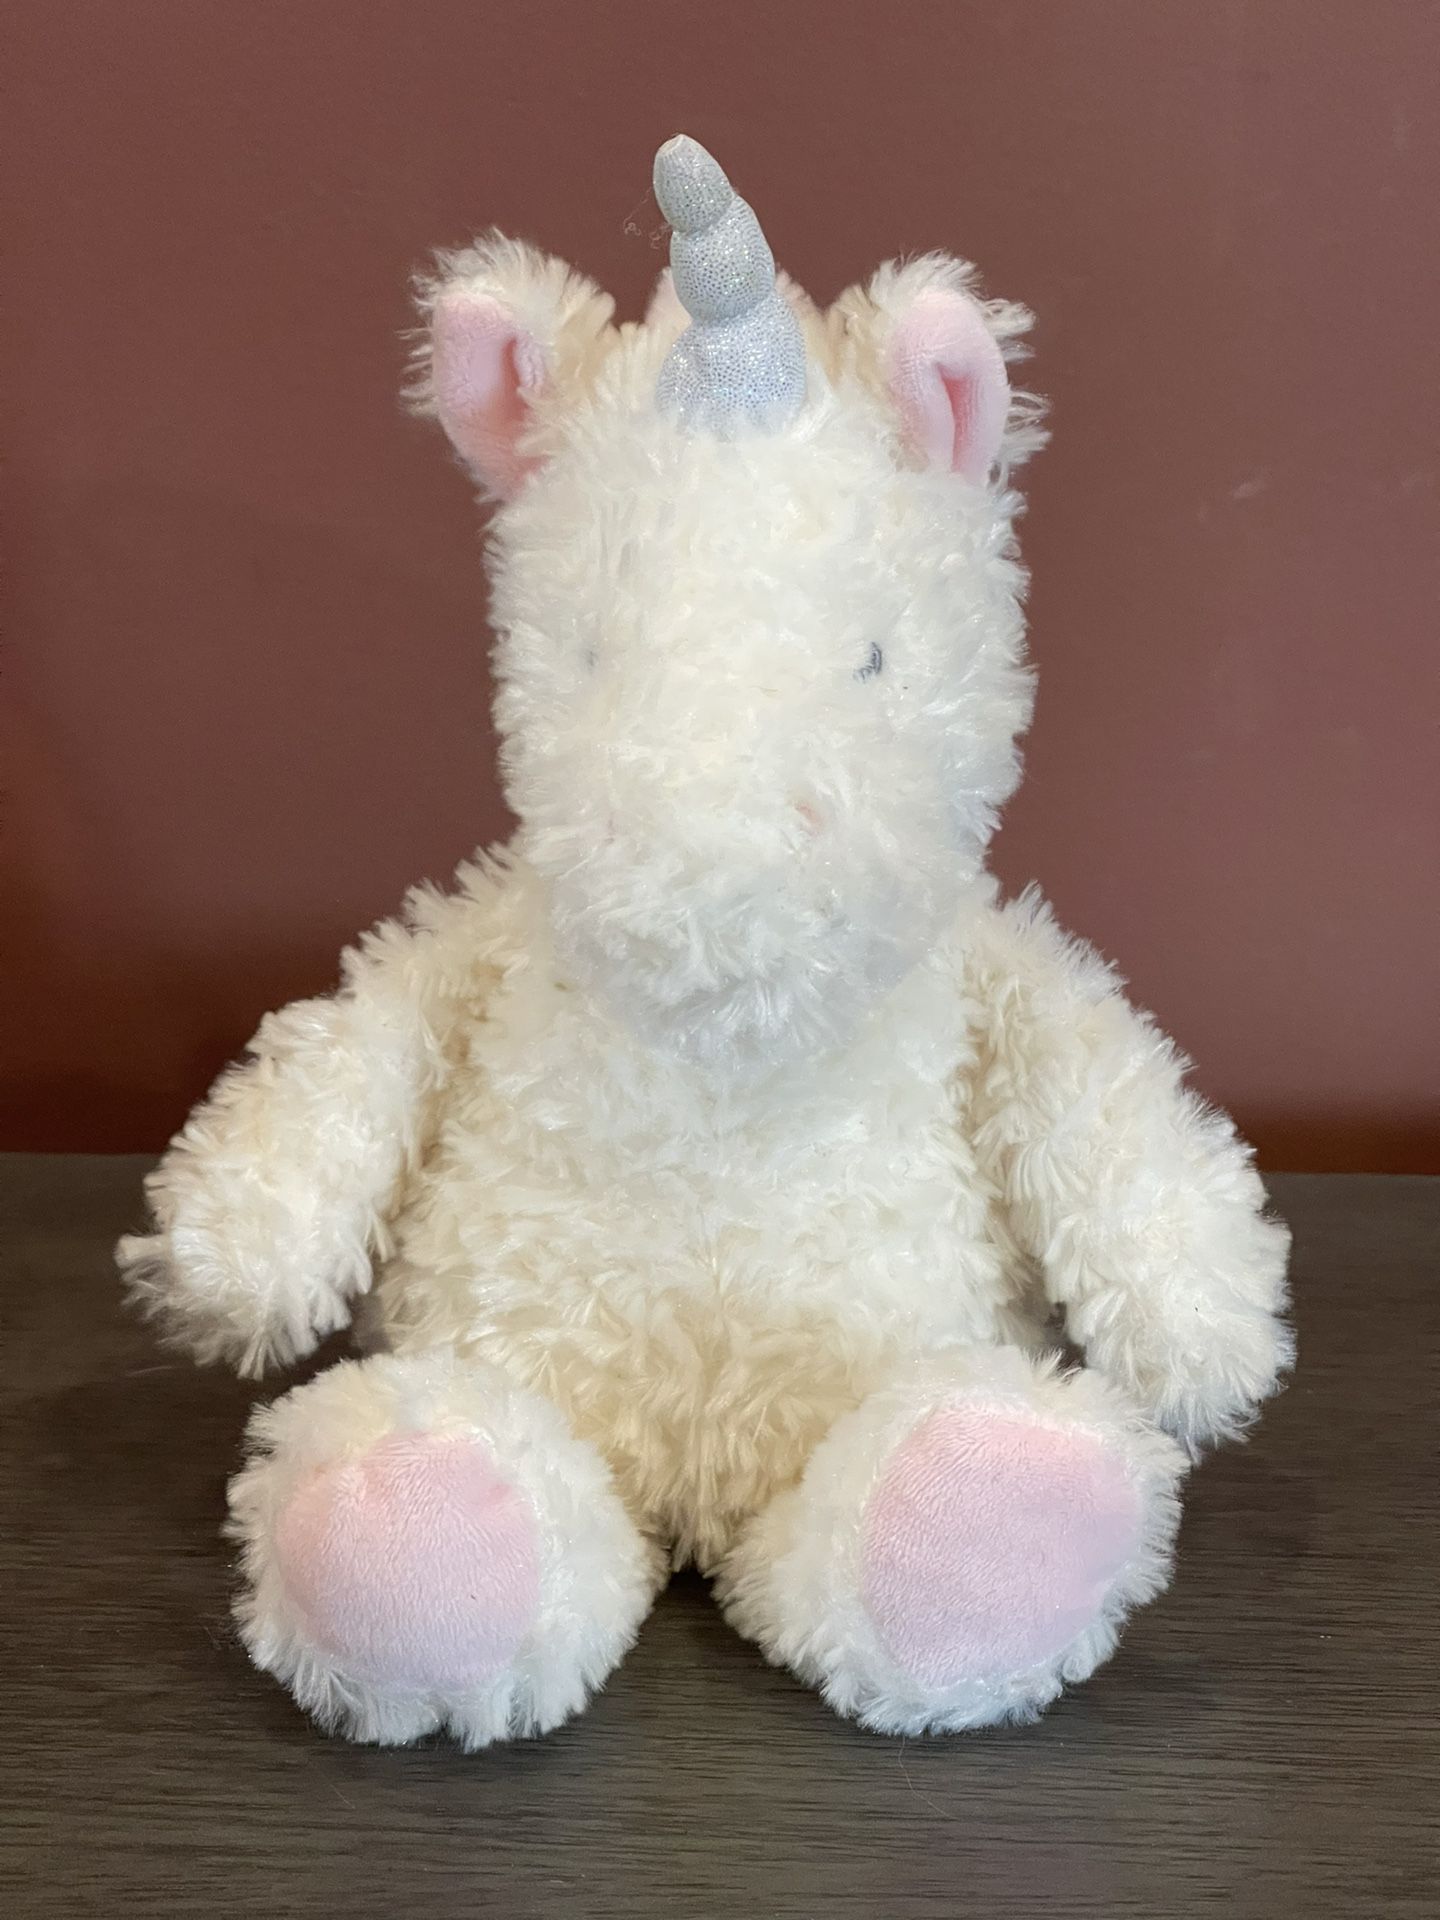 Carter’s Just One You White Fluffy Unicorn 12" Plush Stuffed Toy Sparkle Horn